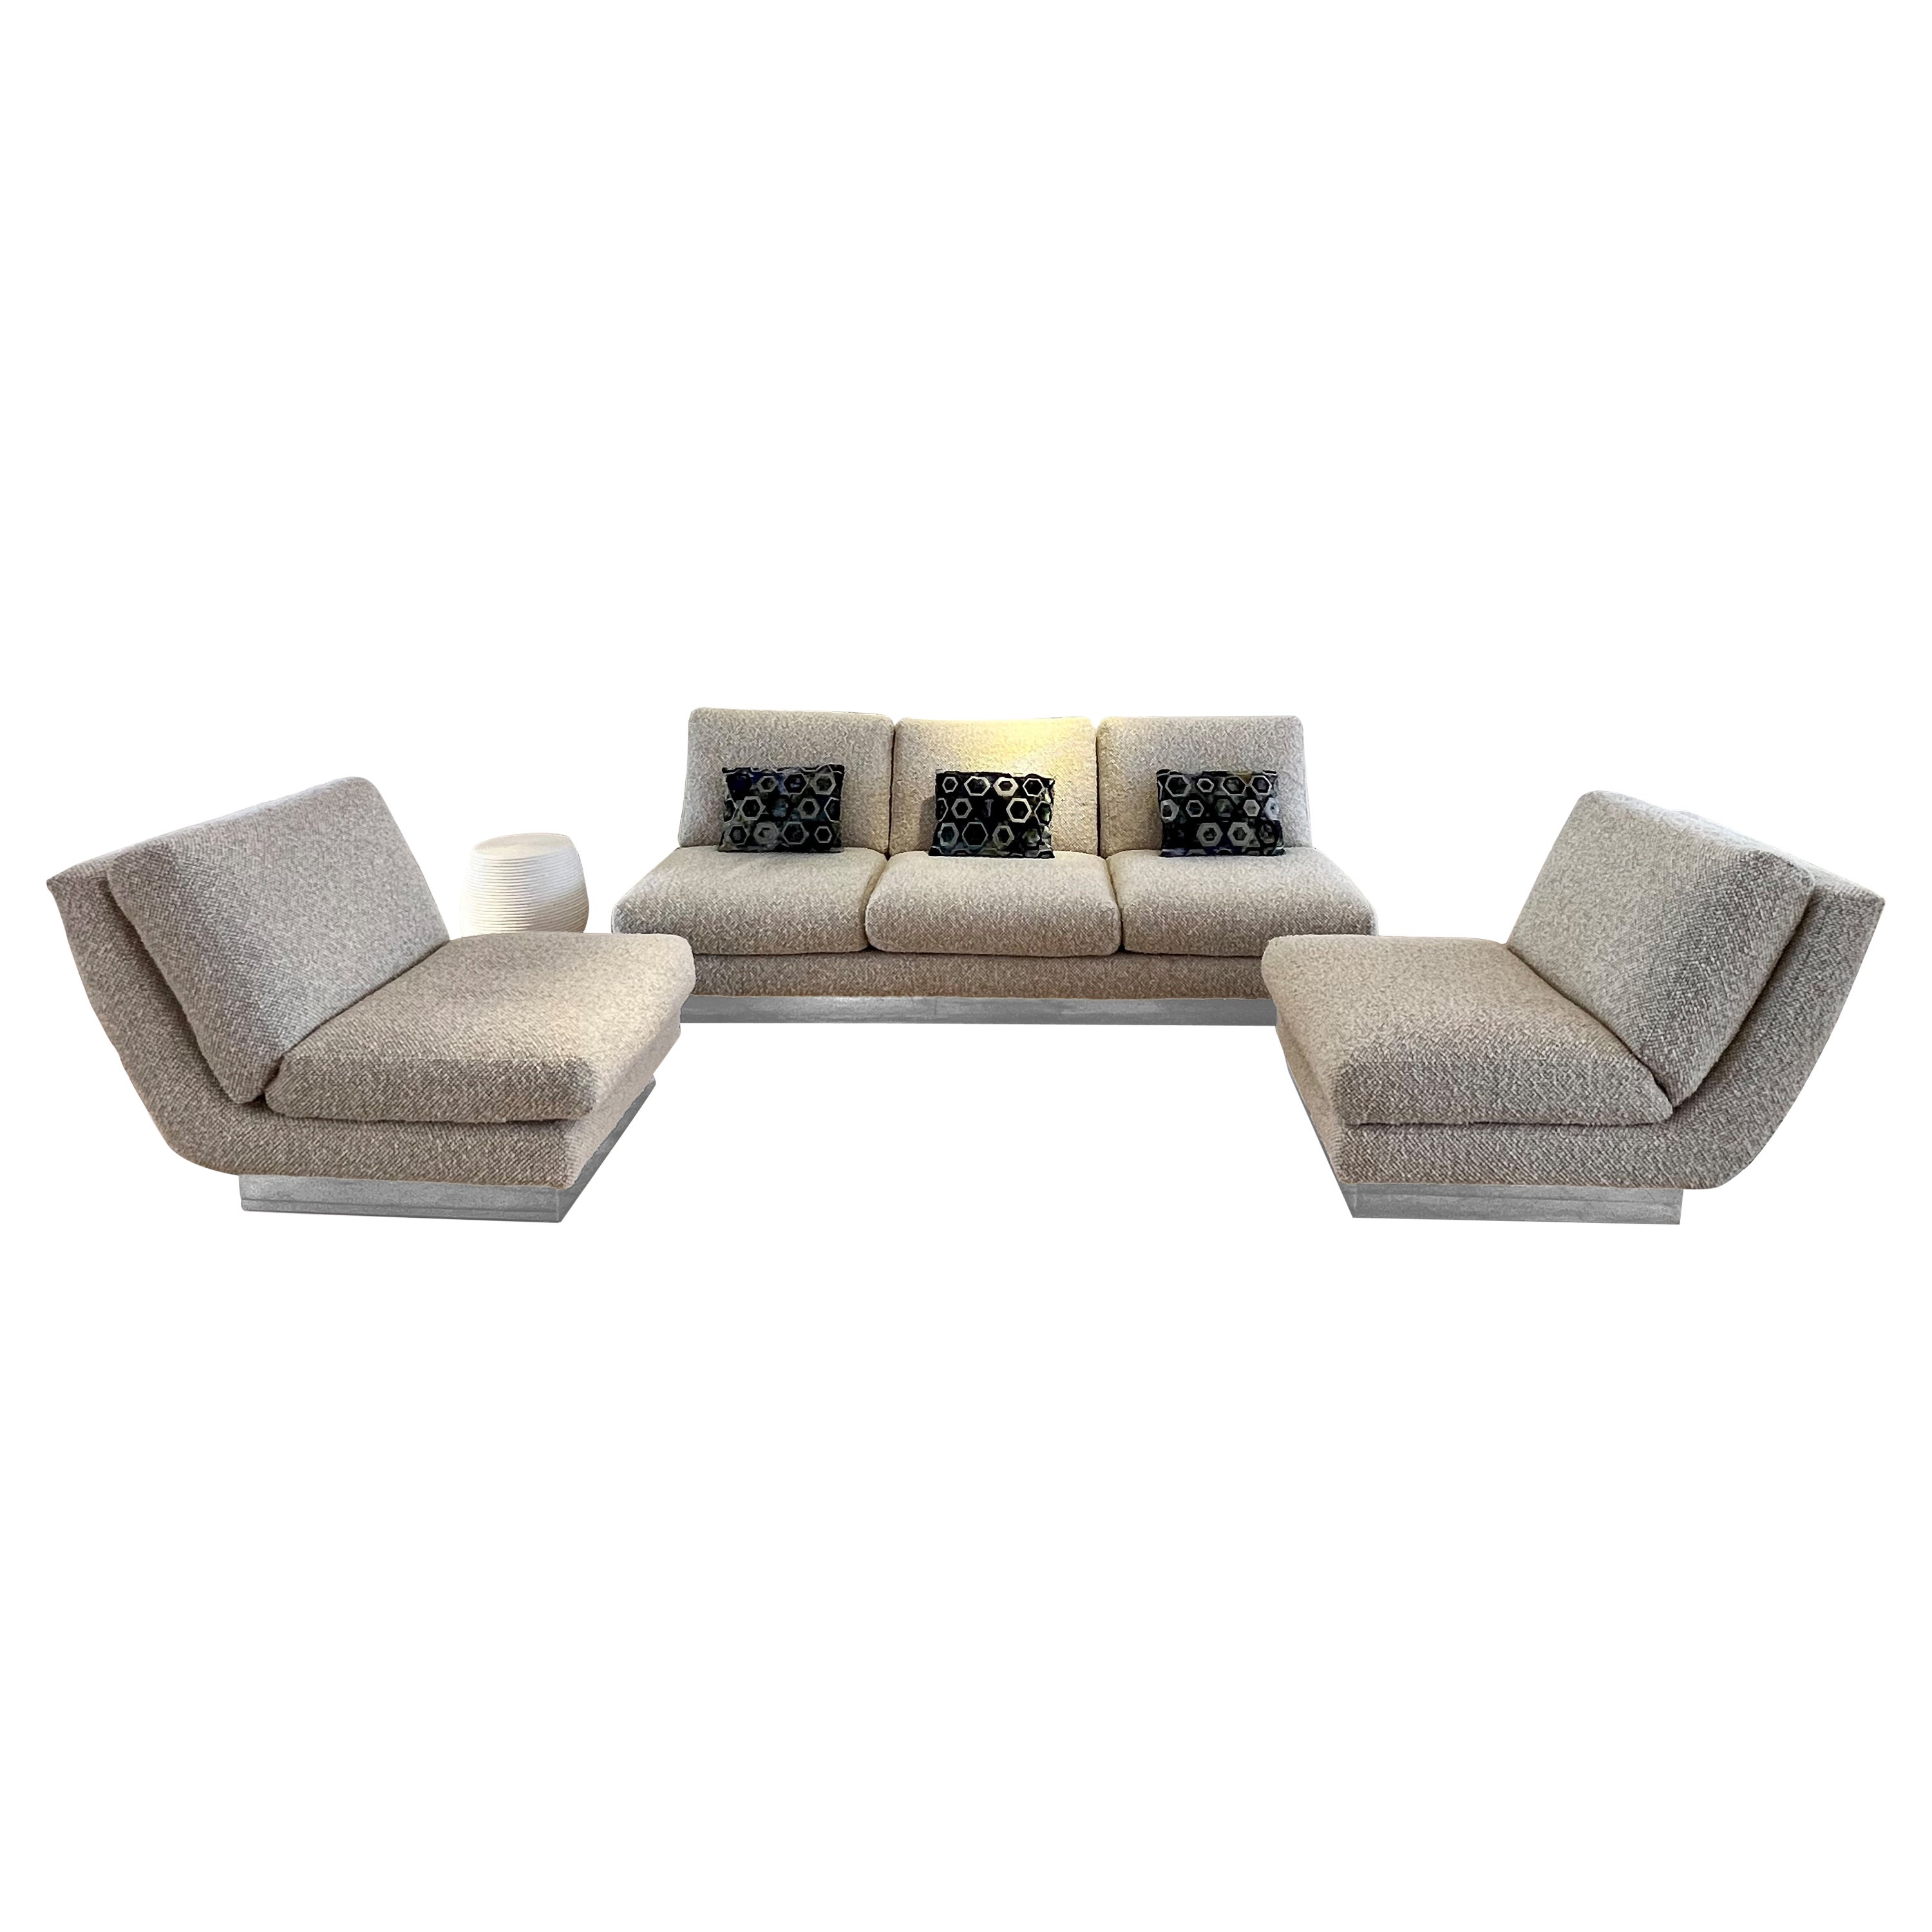 'California' Sofa and 2 Chairs, Jacques Charpentier, 1970s For Sale